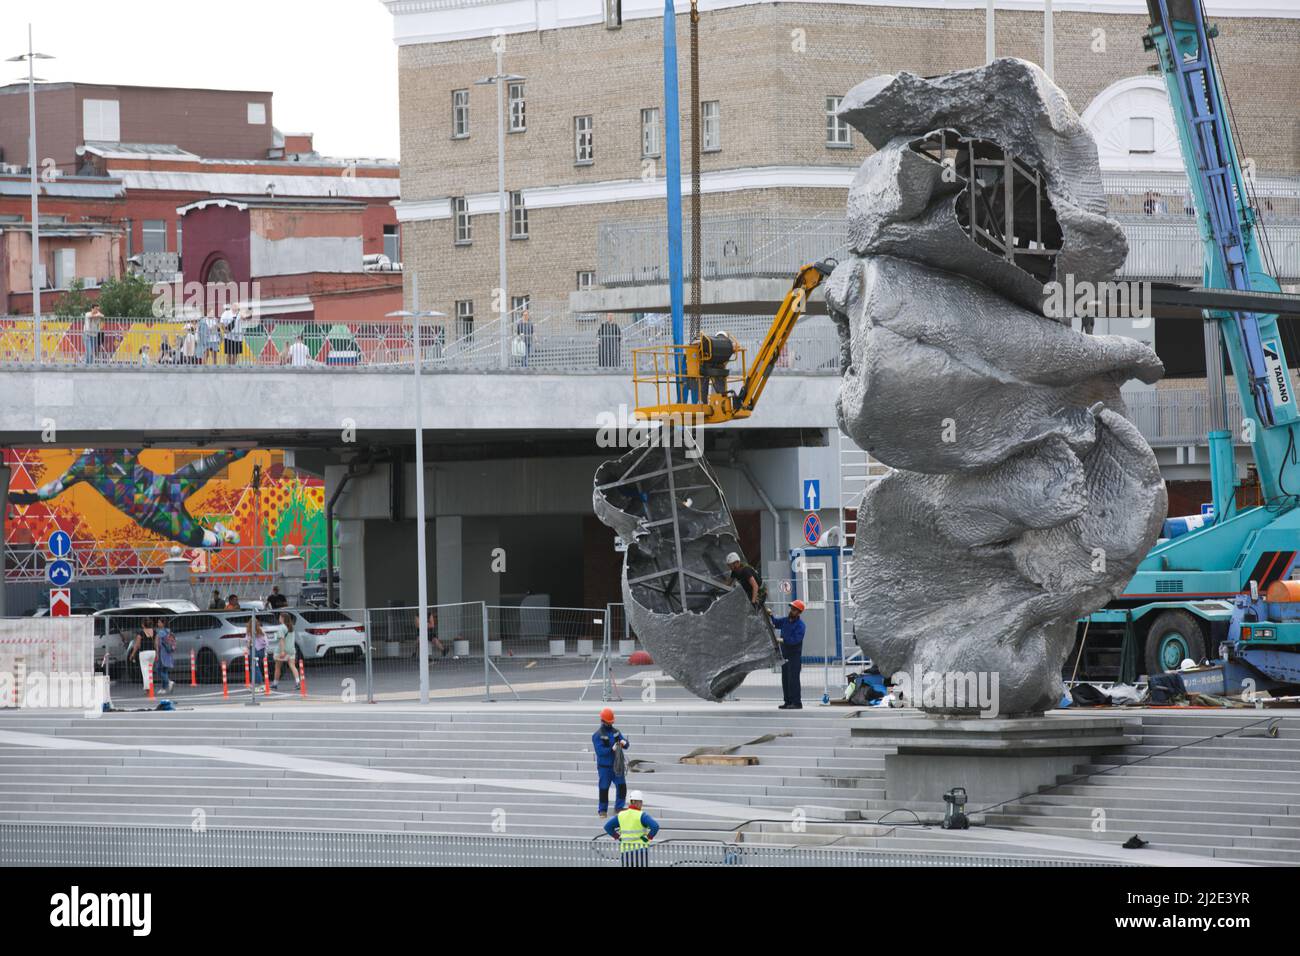 Moscow, Russia, August 14, 2021: The sculpture by Swiss artist Urs Fischer, called Big Clay 4, was installed on Bolotnaya Naberezhnaya. Monumental mod Stock Photo